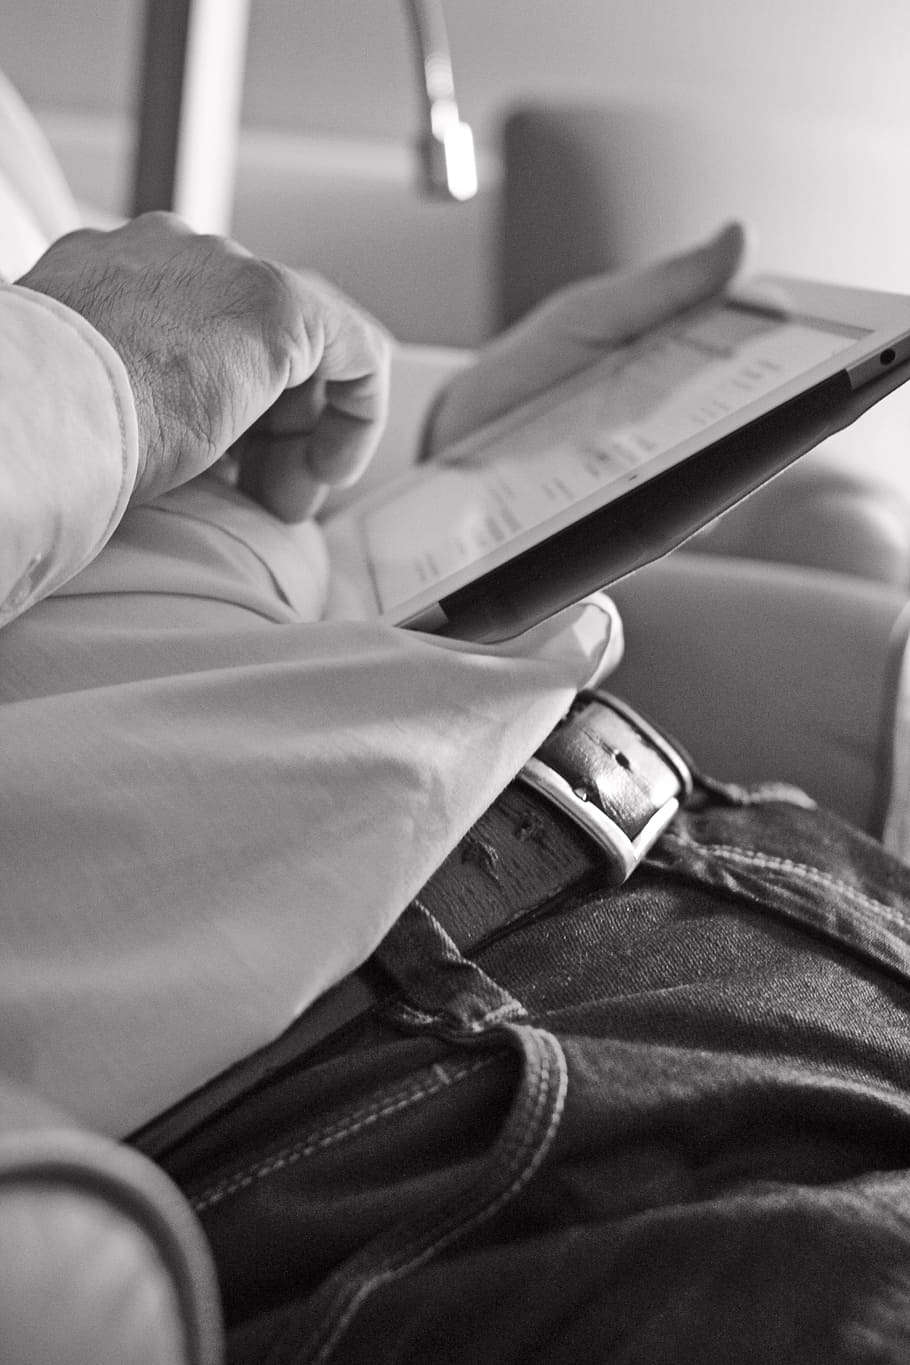 grayscale photo of man holding table computer, ipad, plan, business